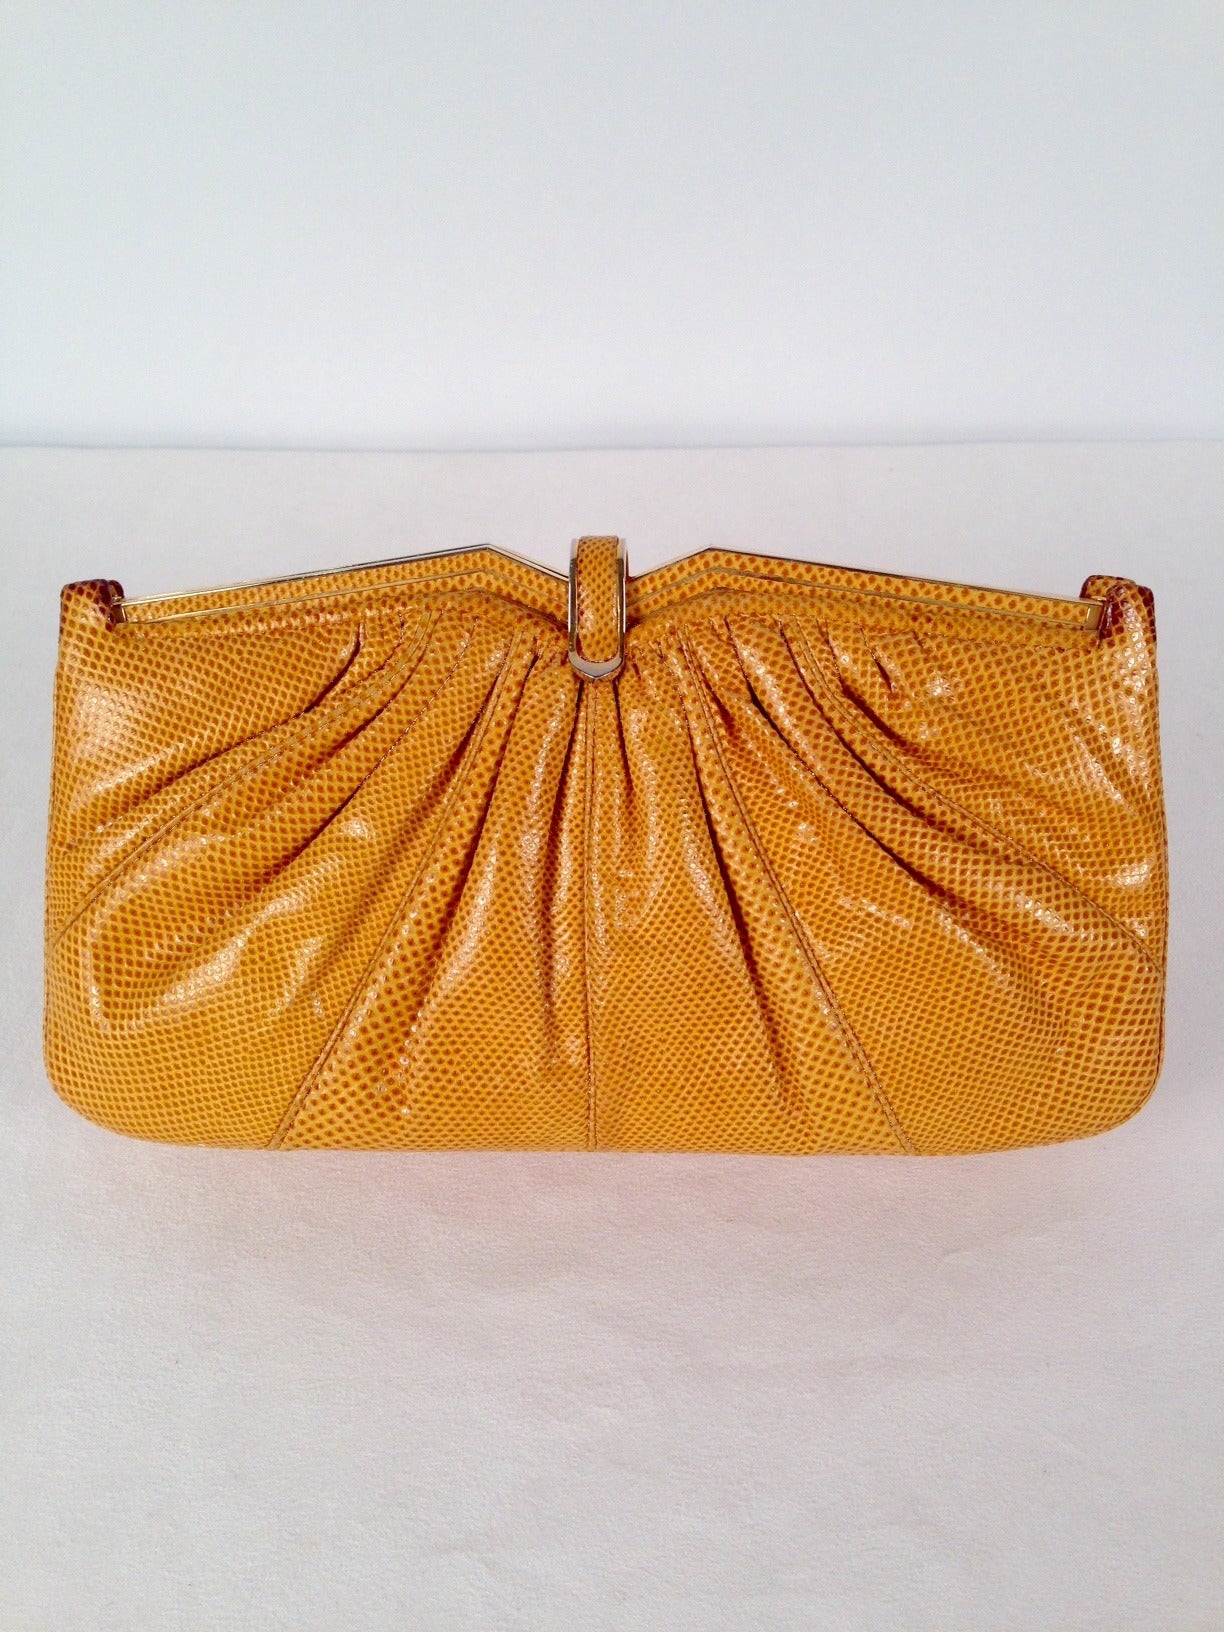 Vintage Yellow Lizard Convertible Clutch is highly desired by all collectors of Judith Leiber! Features slightly gathered, butter-soft lizard skin.  Bag easily converts from clutch to shoulder bag with minimal effort!  Forgiving gusset accommodates